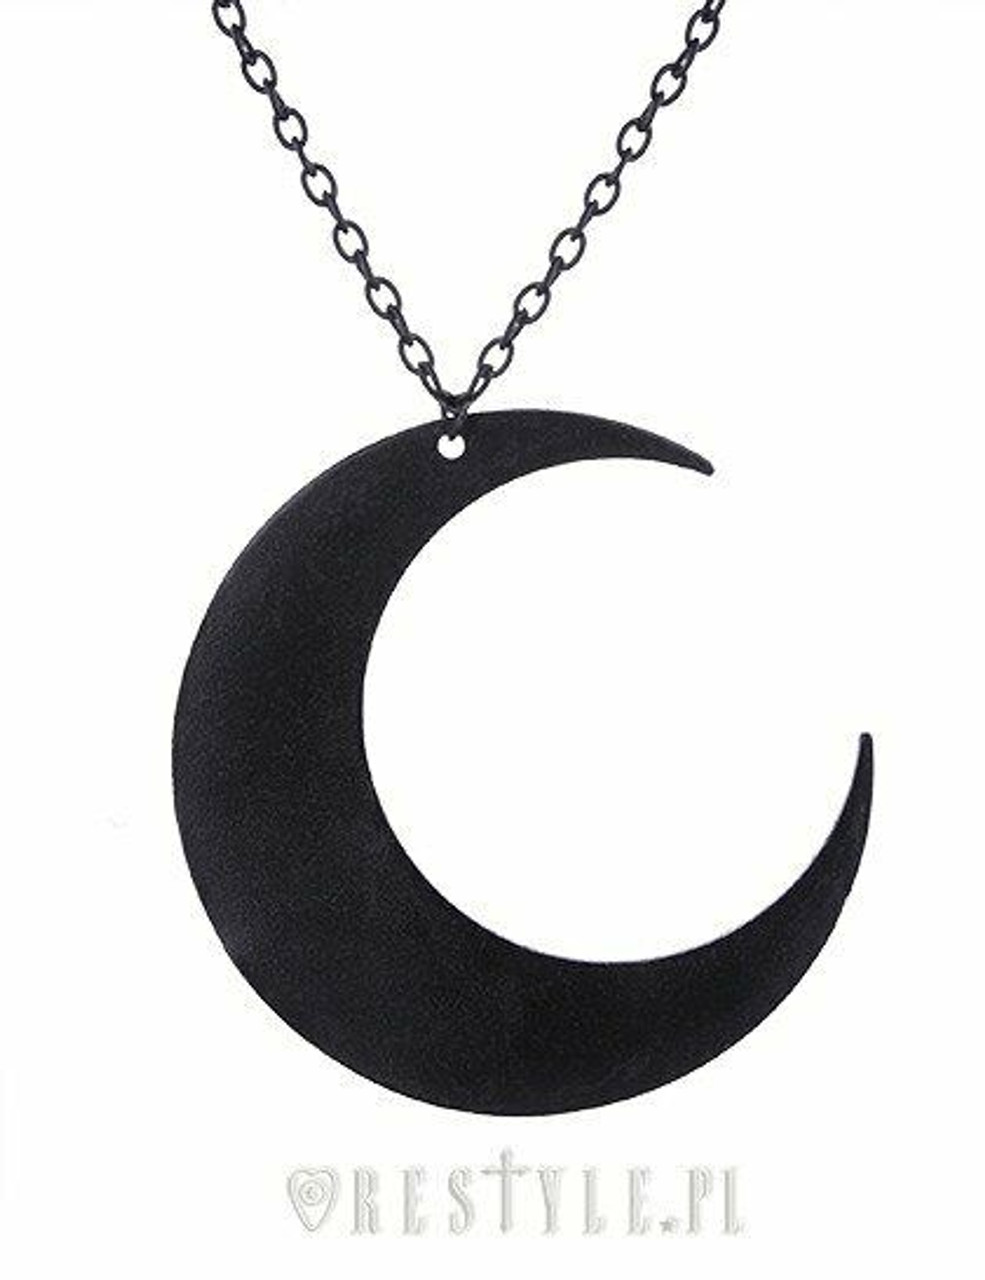 New silver and moon pendant bracelet pendant crescent moon gothic witch